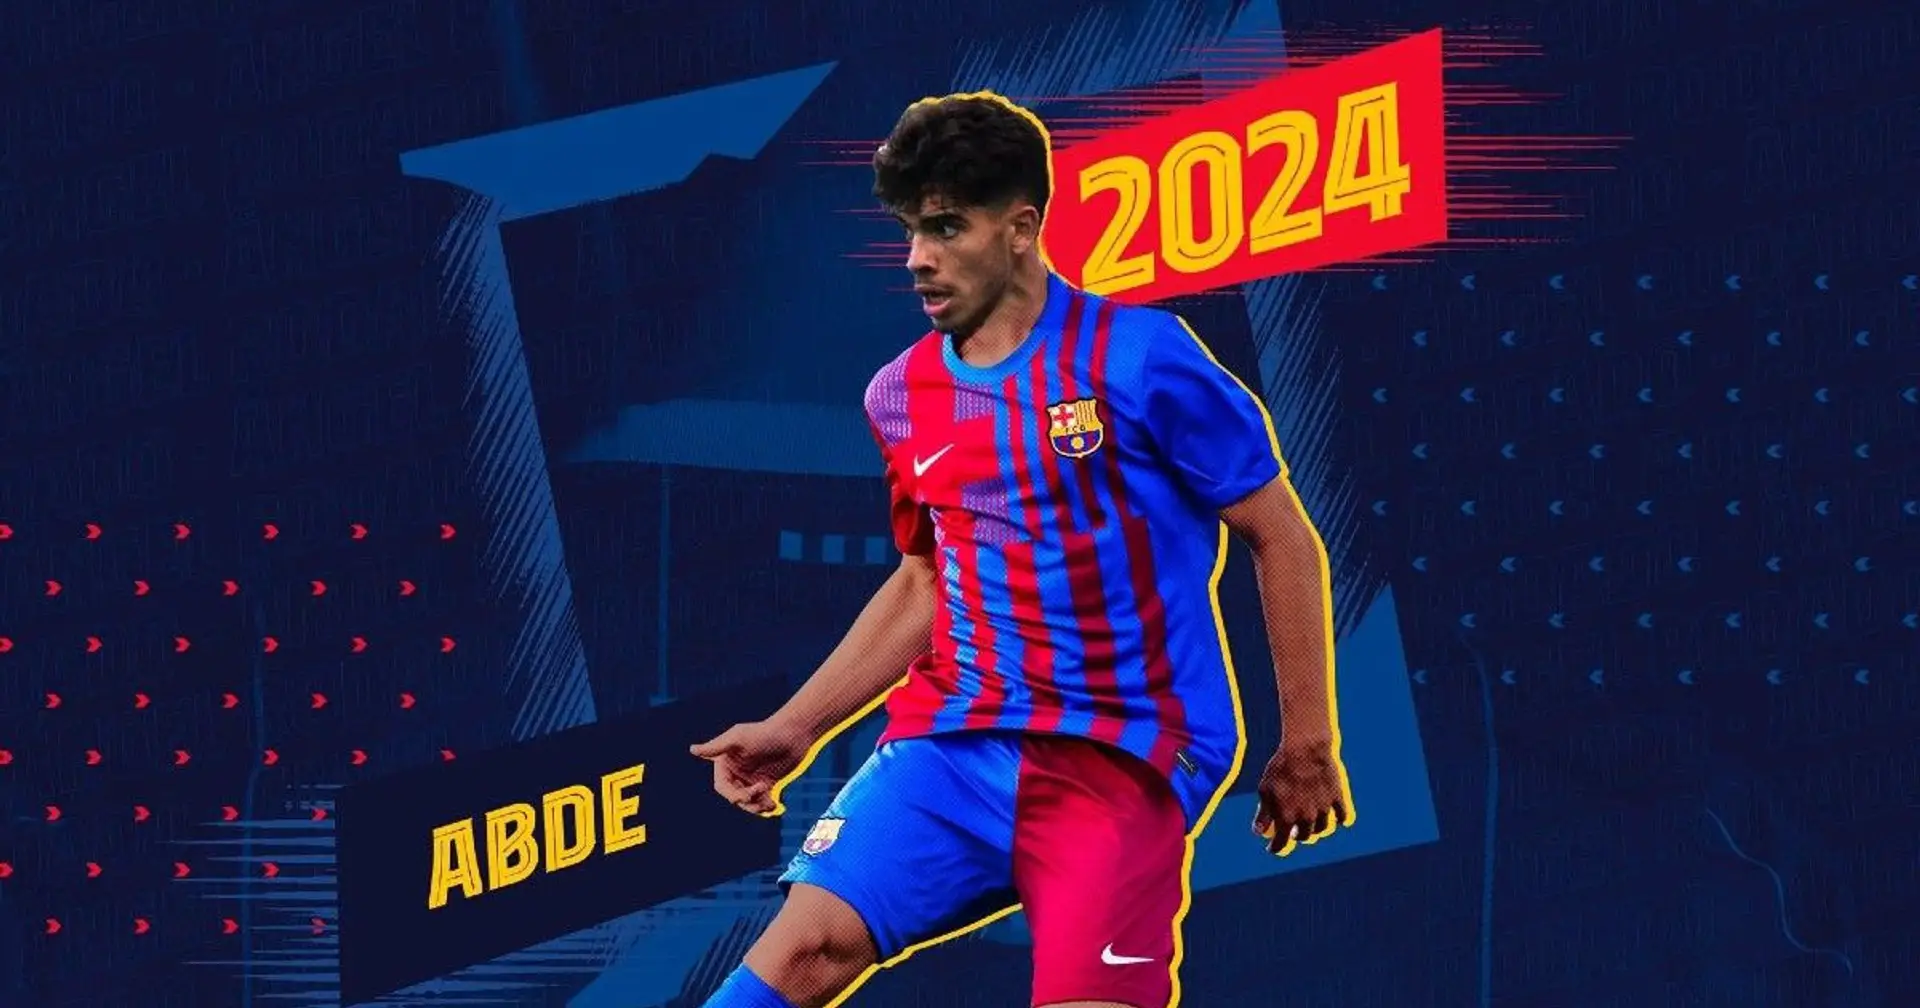 OFFICIAL: Barca B sign talented winger Abde for €2m